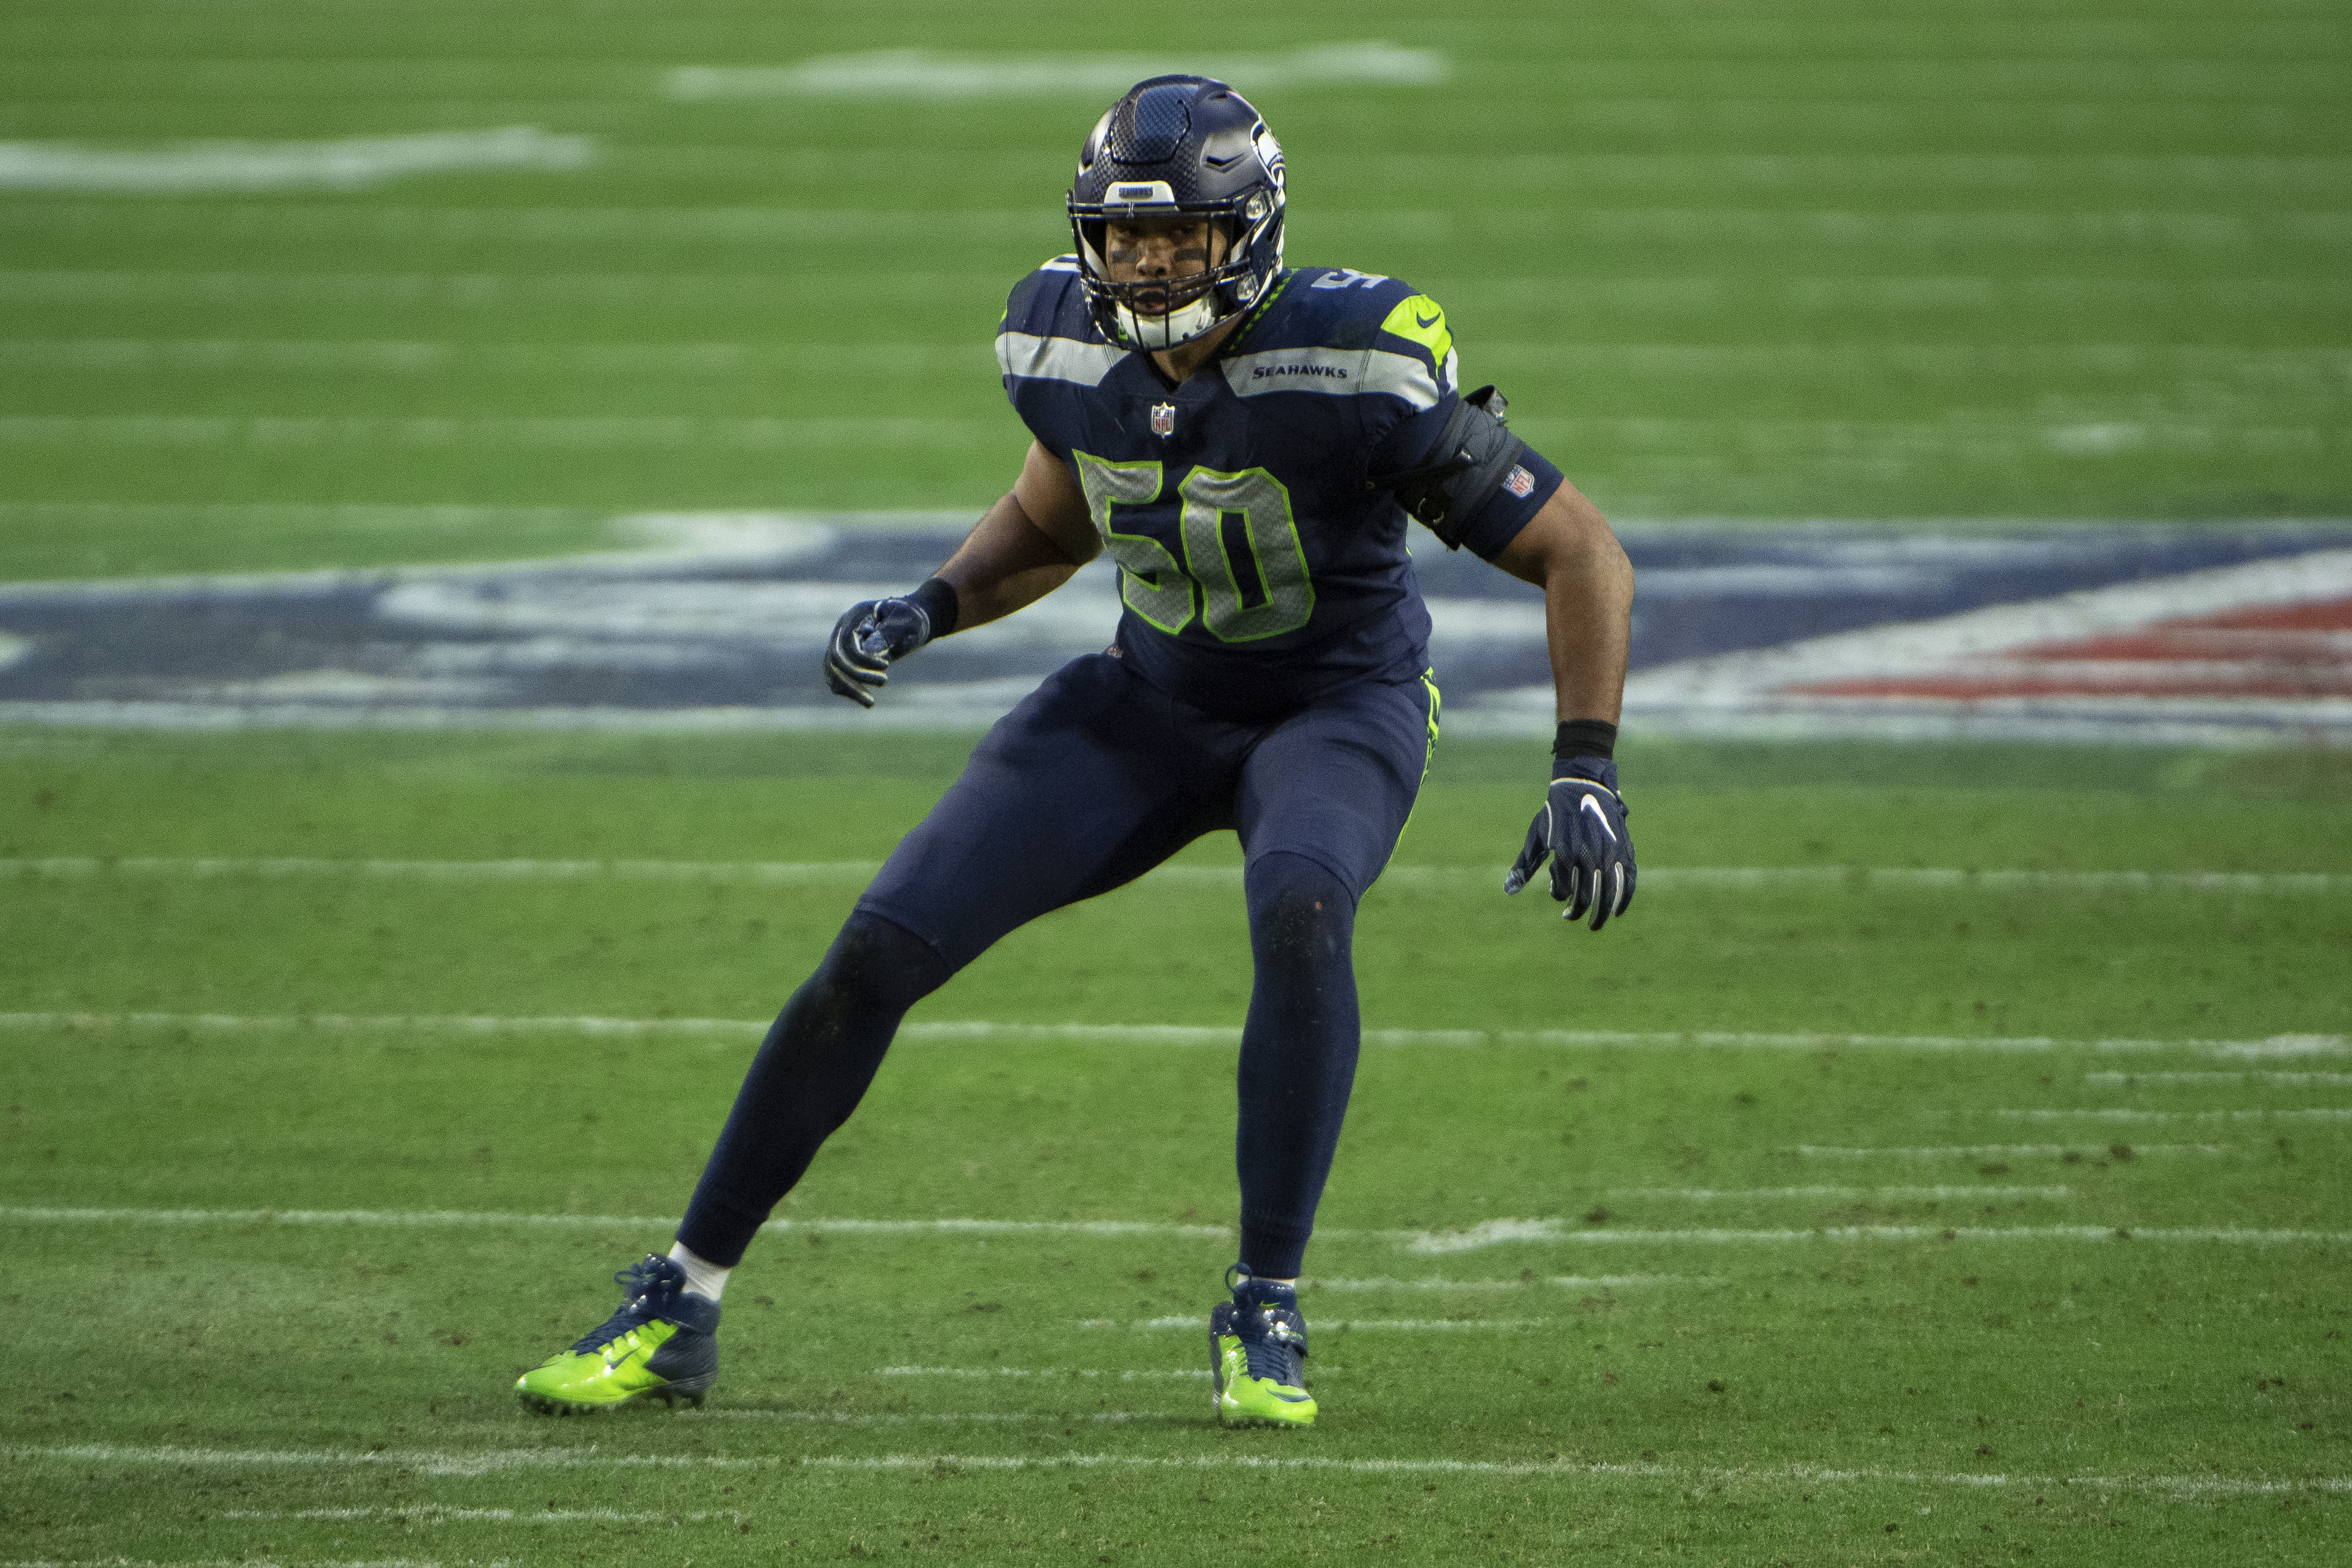 Raiders Rumors: Former Seahawks LB K.J. Wright Agrees to 1-Year Contract With LV